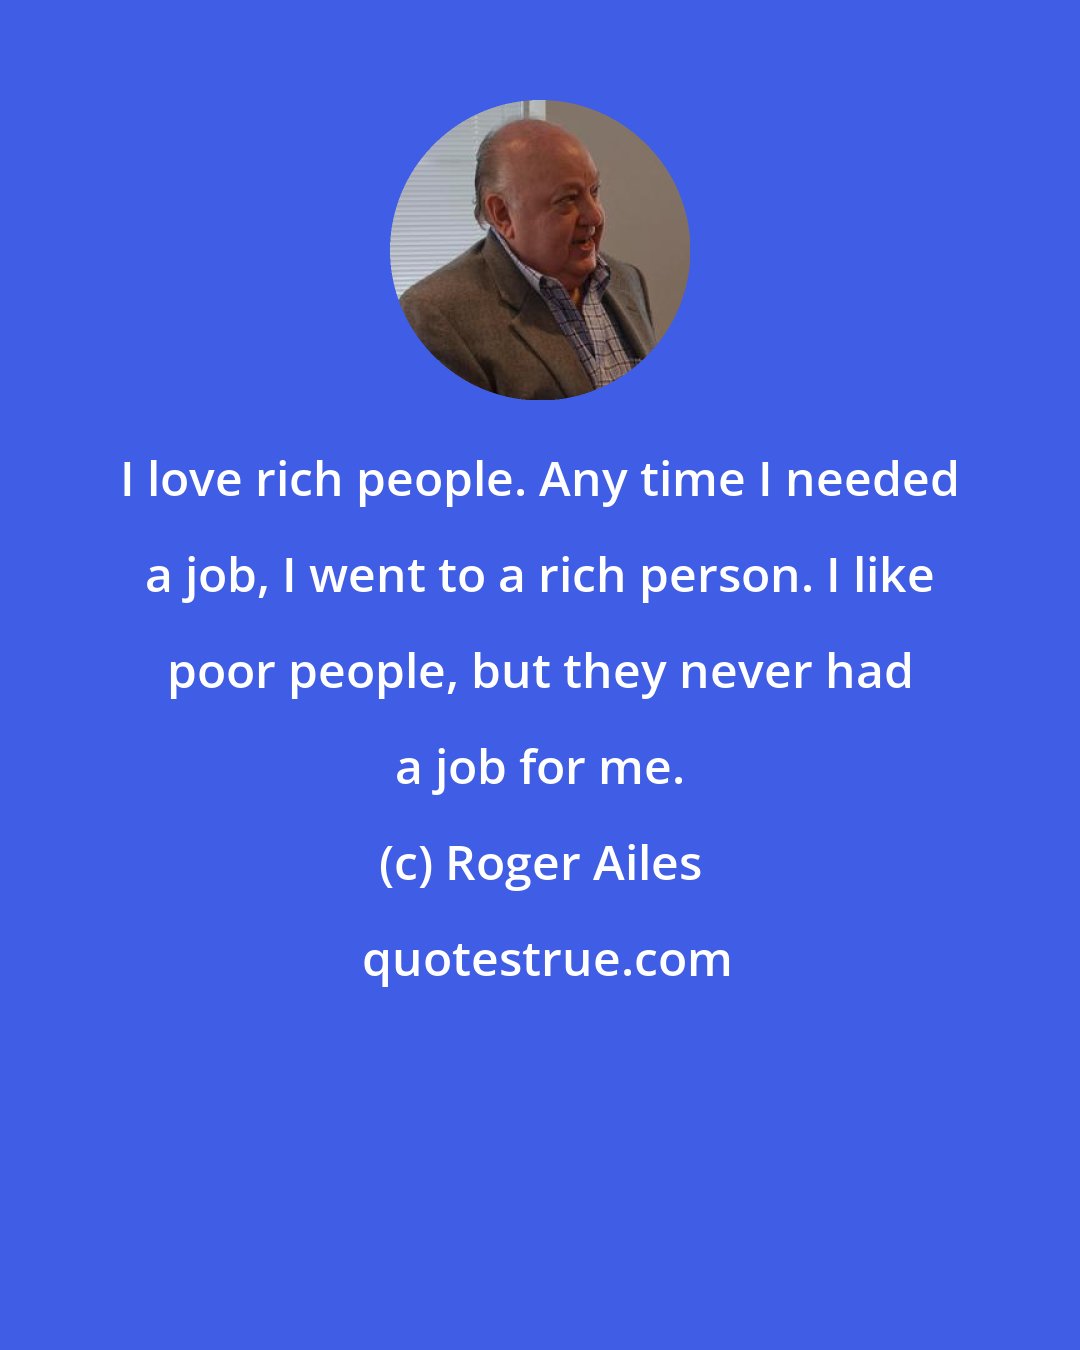 Roger Ailes: I love rich people. Any time I needed a job, I went to a rich person. I like poor people, but they never had a job for me.